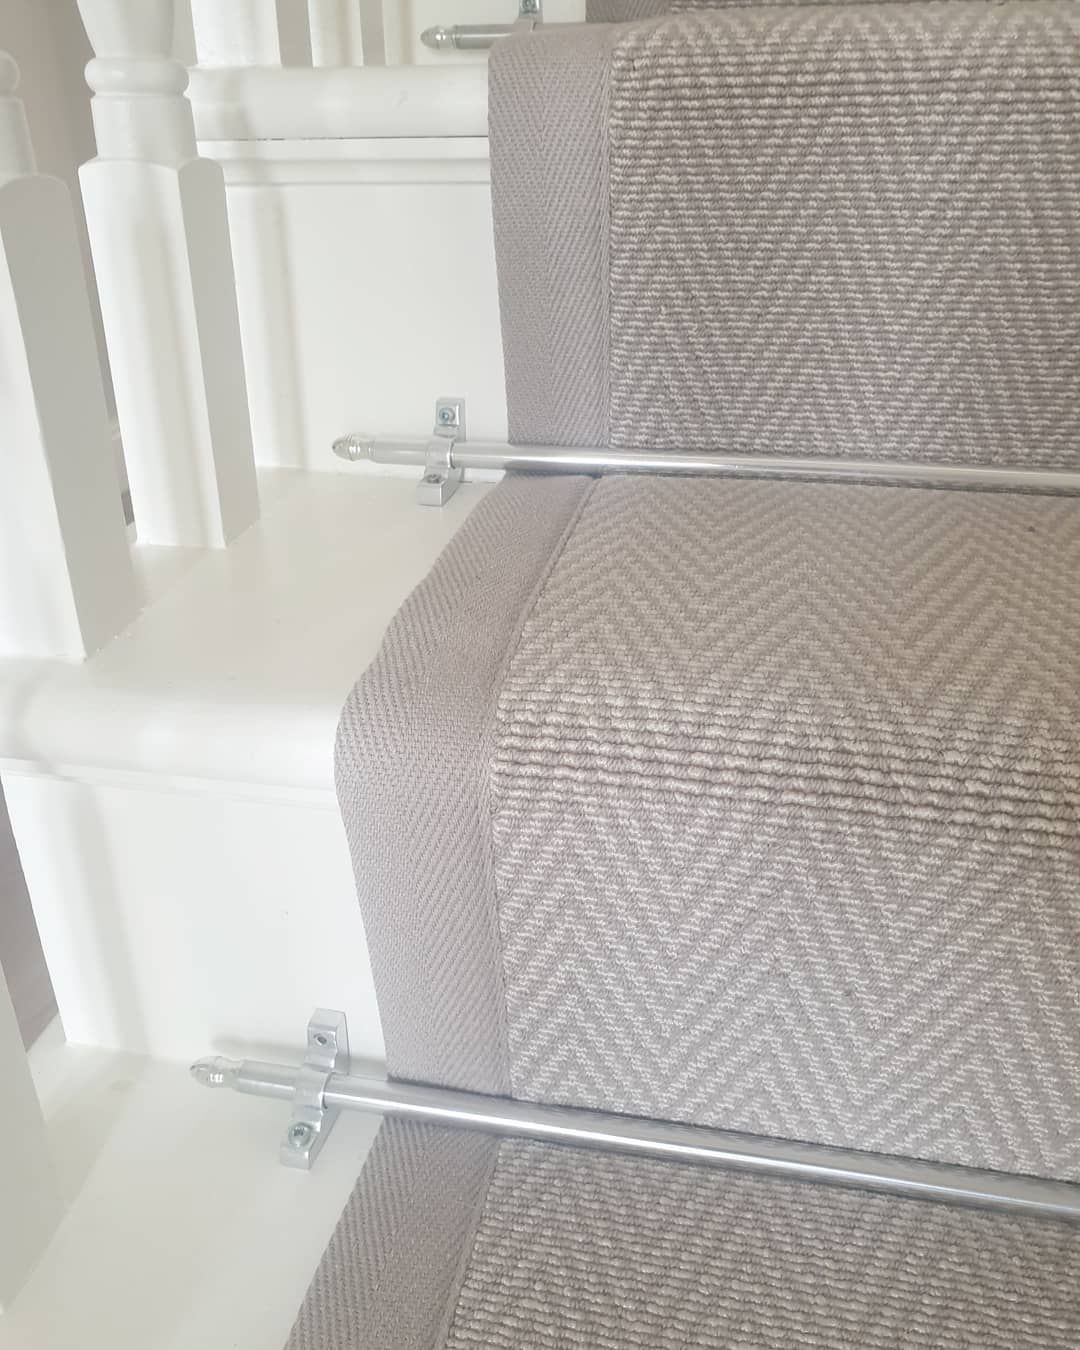 Lorna On Instagram: “Hello New Stair Runner! Here'S A Close Up Of The Beautiful Vogue Herringbone Carpet In 'Stone' By @Mattbrittoncarpets With 2 Inch Binding…”